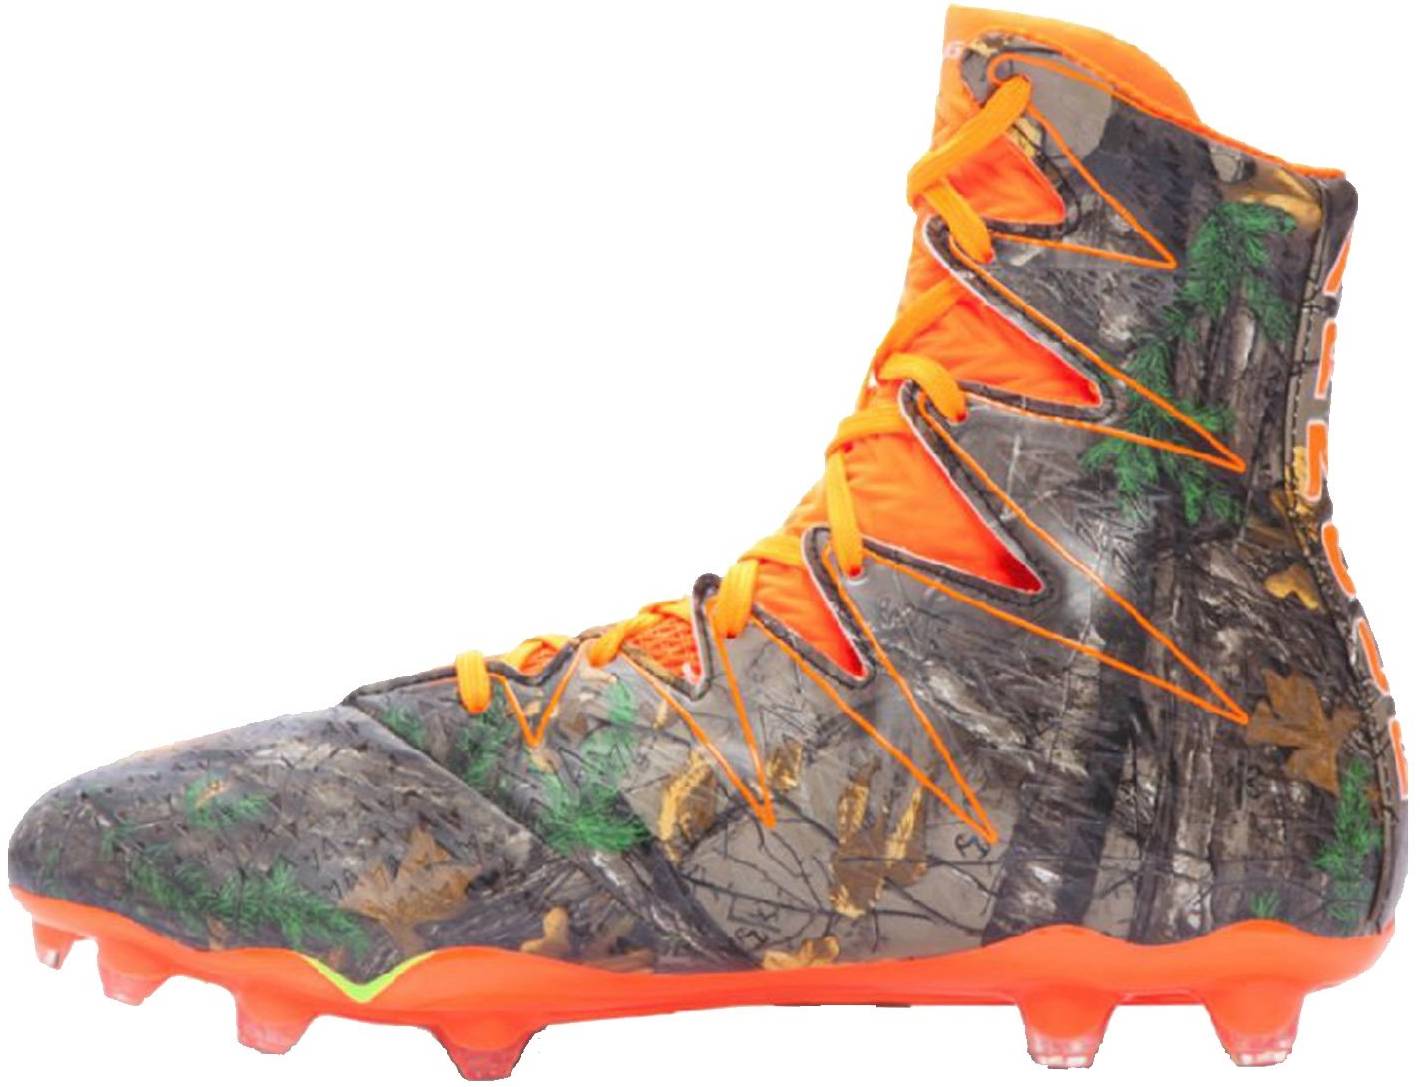 yellow under armour football cleats